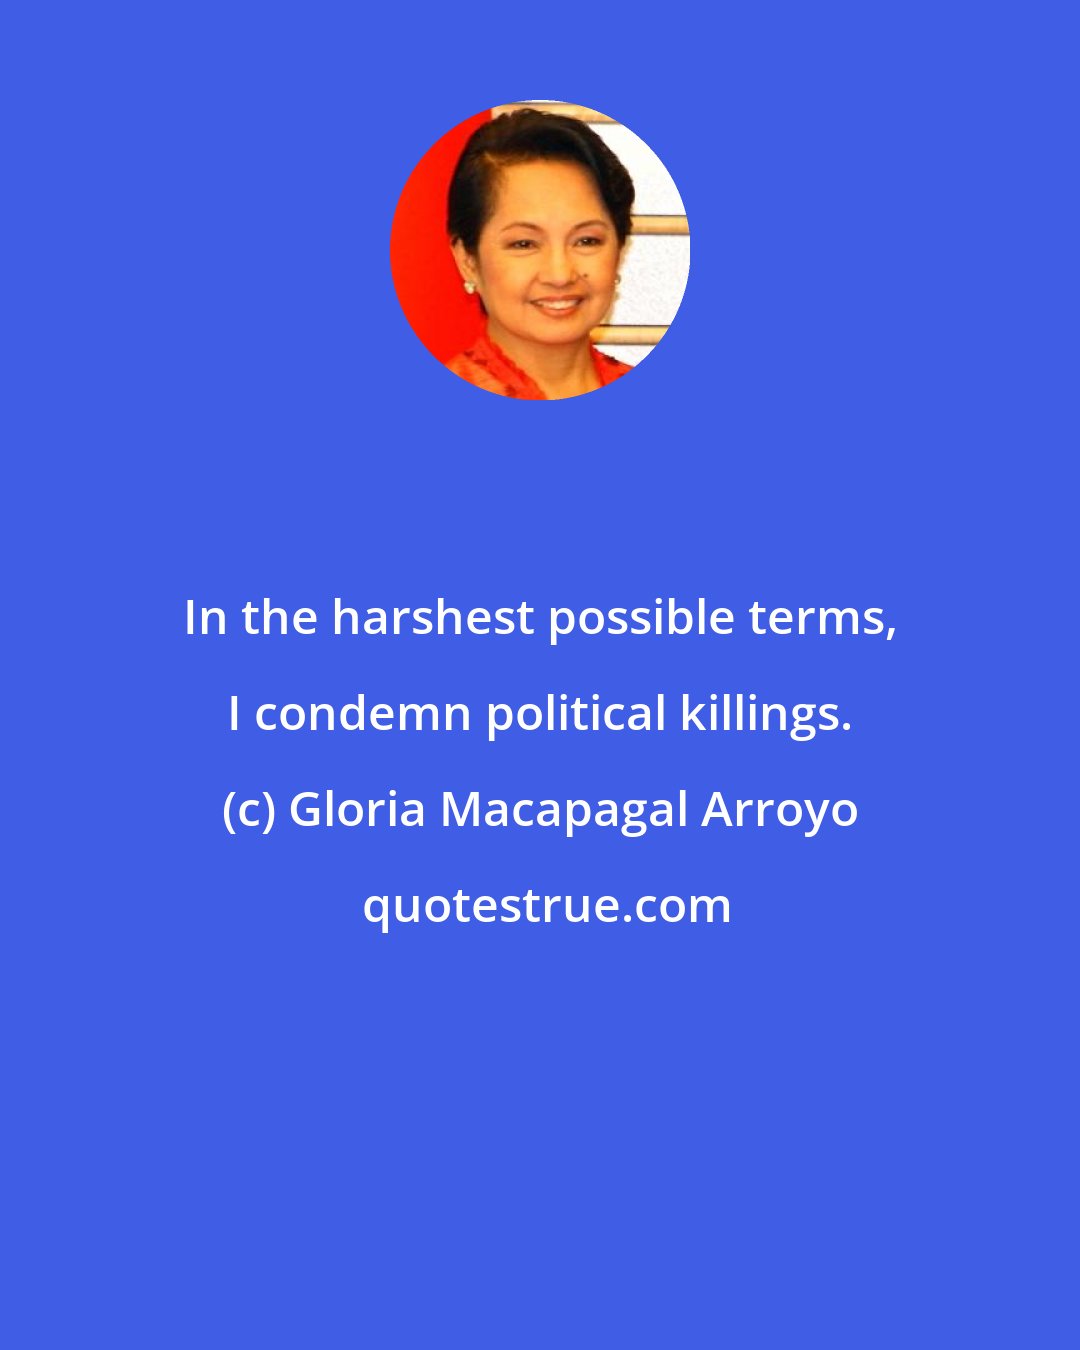 Gloria Macapagal Arroyo: In the harshest possible terms, I condemn political killings.